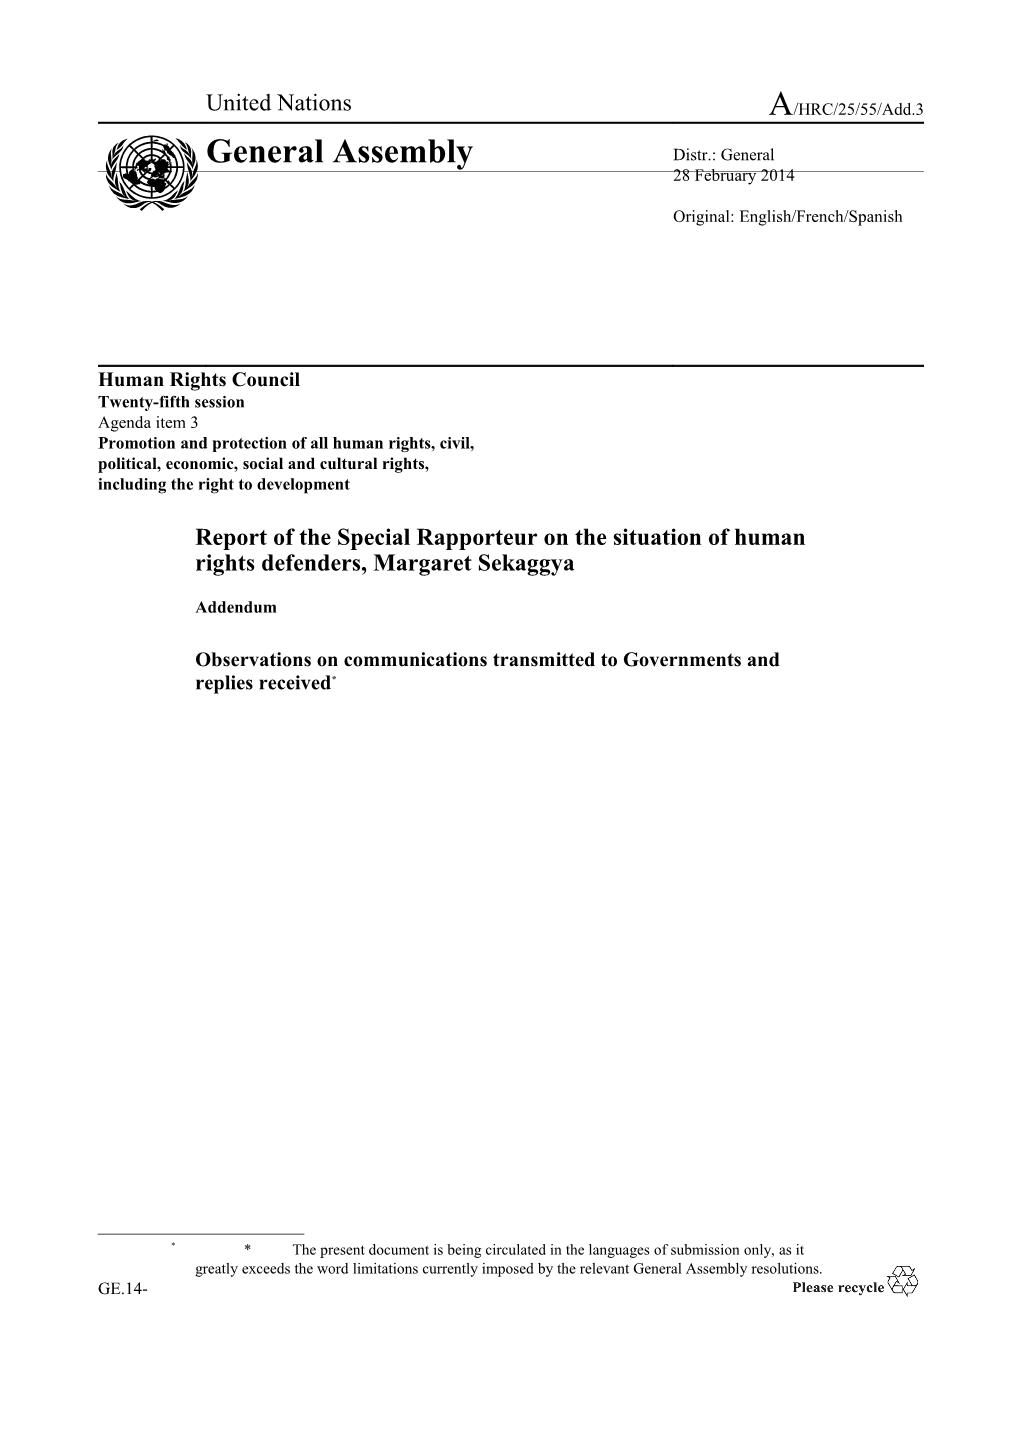 Report of the Special Rapporteur on the Situation of Human Rights Defenders - Observations